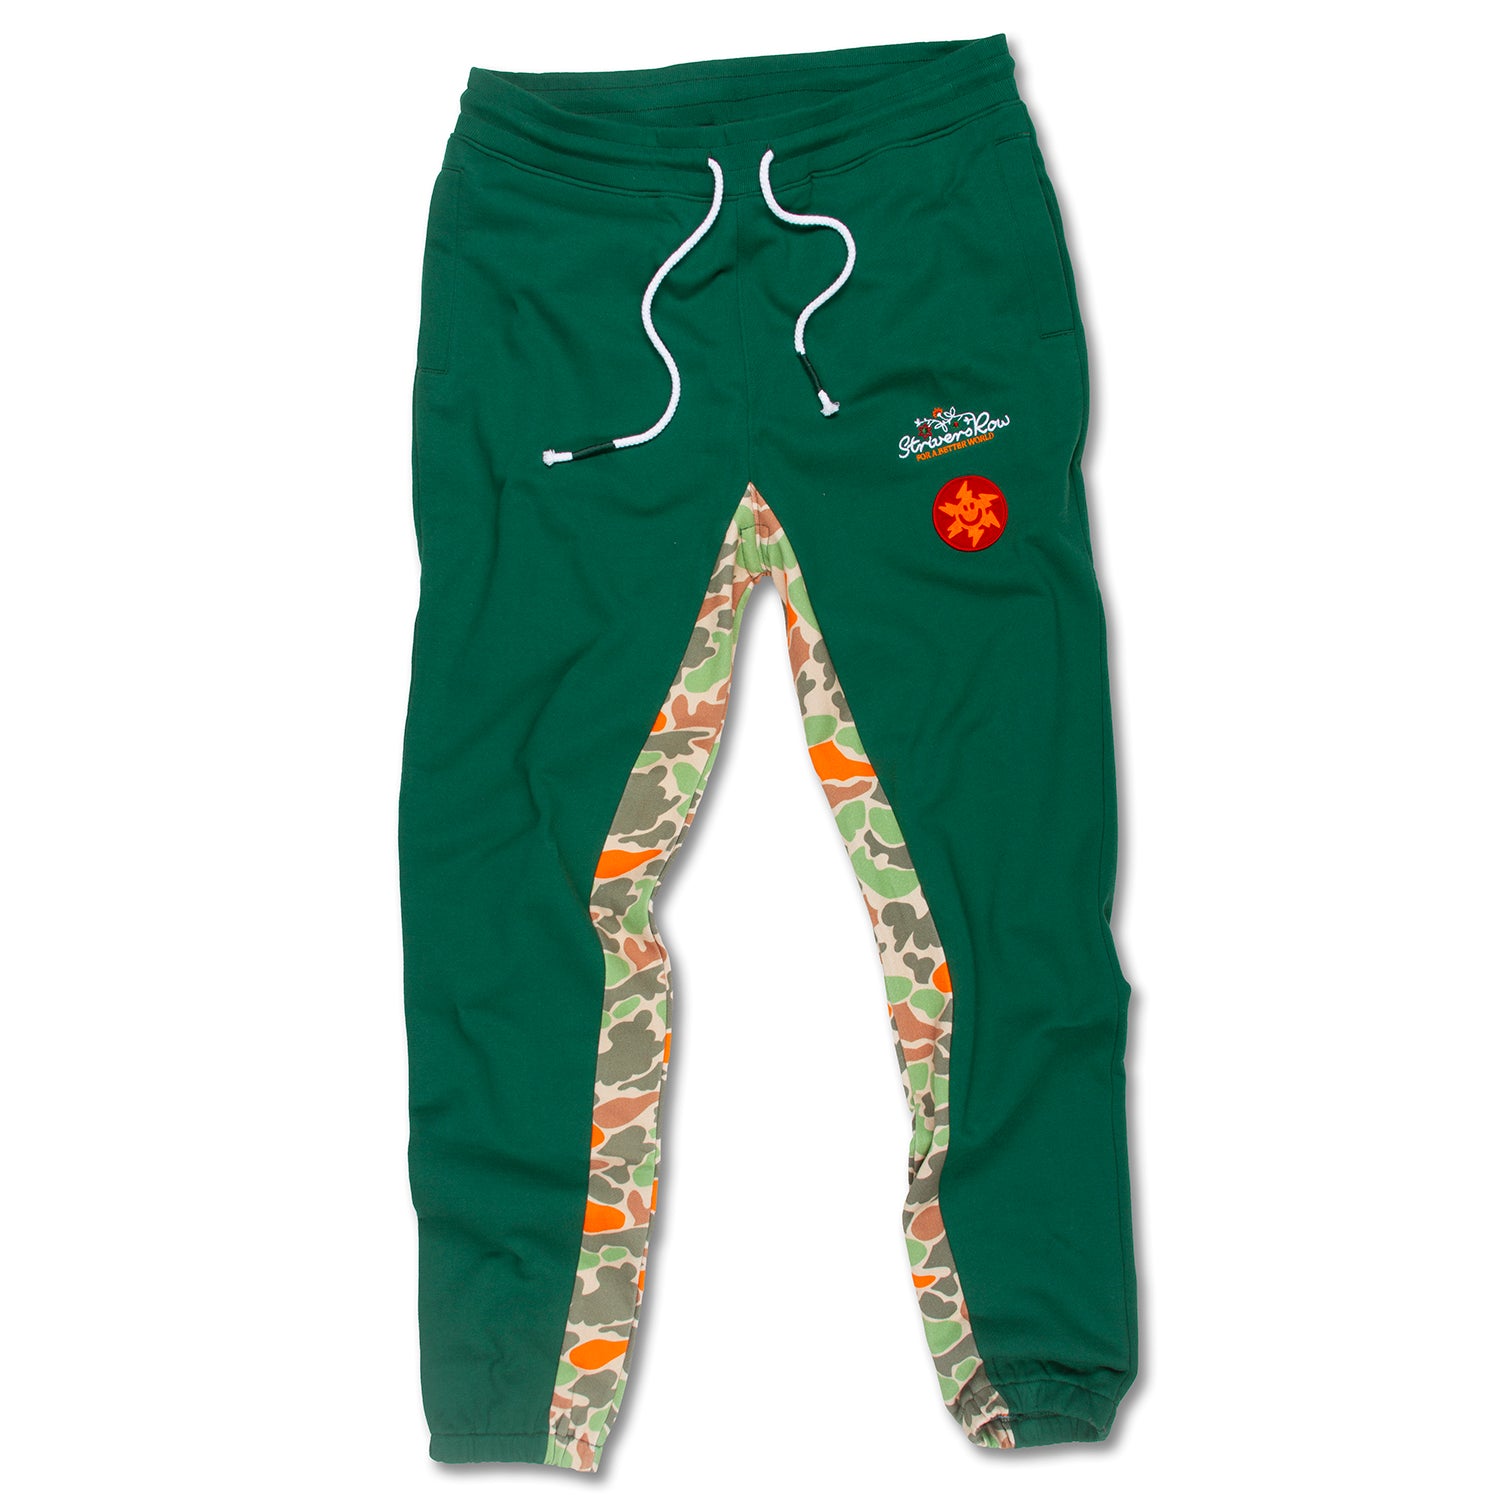 Outlook Sweatpant